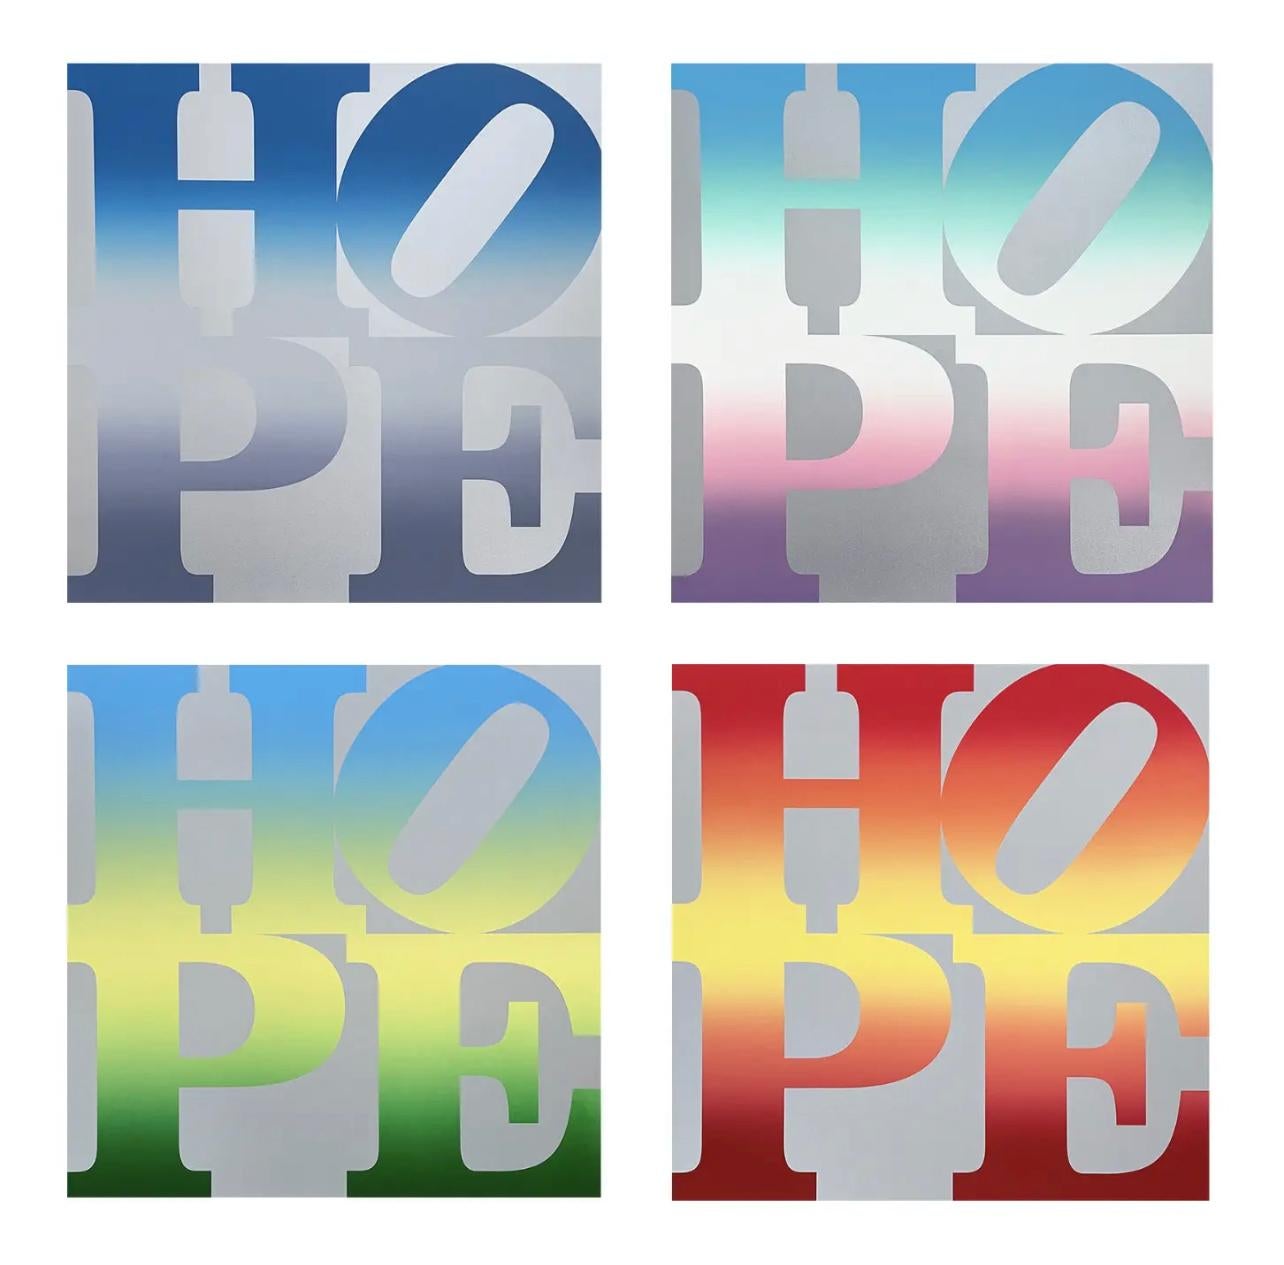 Artist: Robert Indiana (1928-2018)
Title: Four Seasons of HOPE (four artworks)
Year: 2012
Medium: Silkscreen on Coventry Rag paper
Edition: 125, plus proofs
Size: 35.25 x 25.5 inches, each
Condition: Excellent
Inscription: Each sheet pencil signed